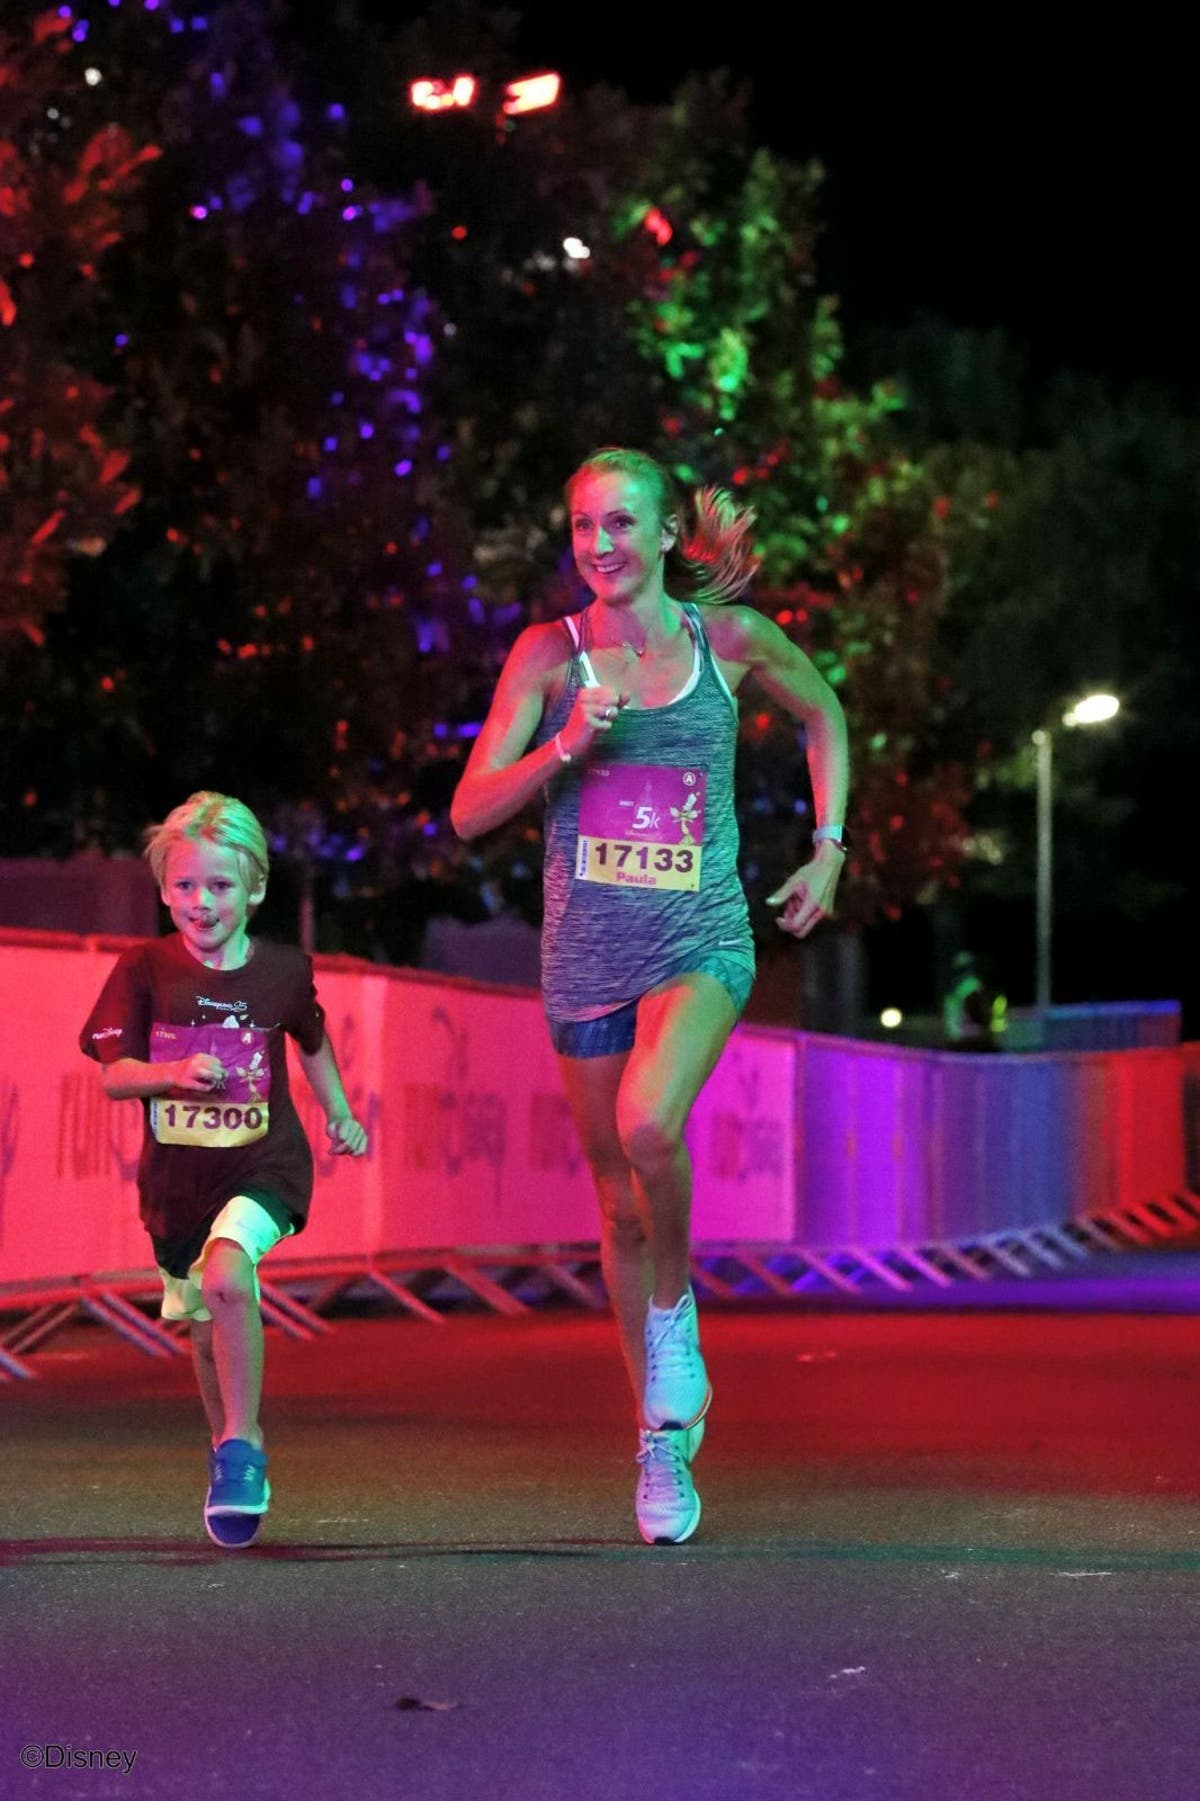 Paula Radcliffe on her kids’ love of running and why you can’t beat tackling a fun run as a family